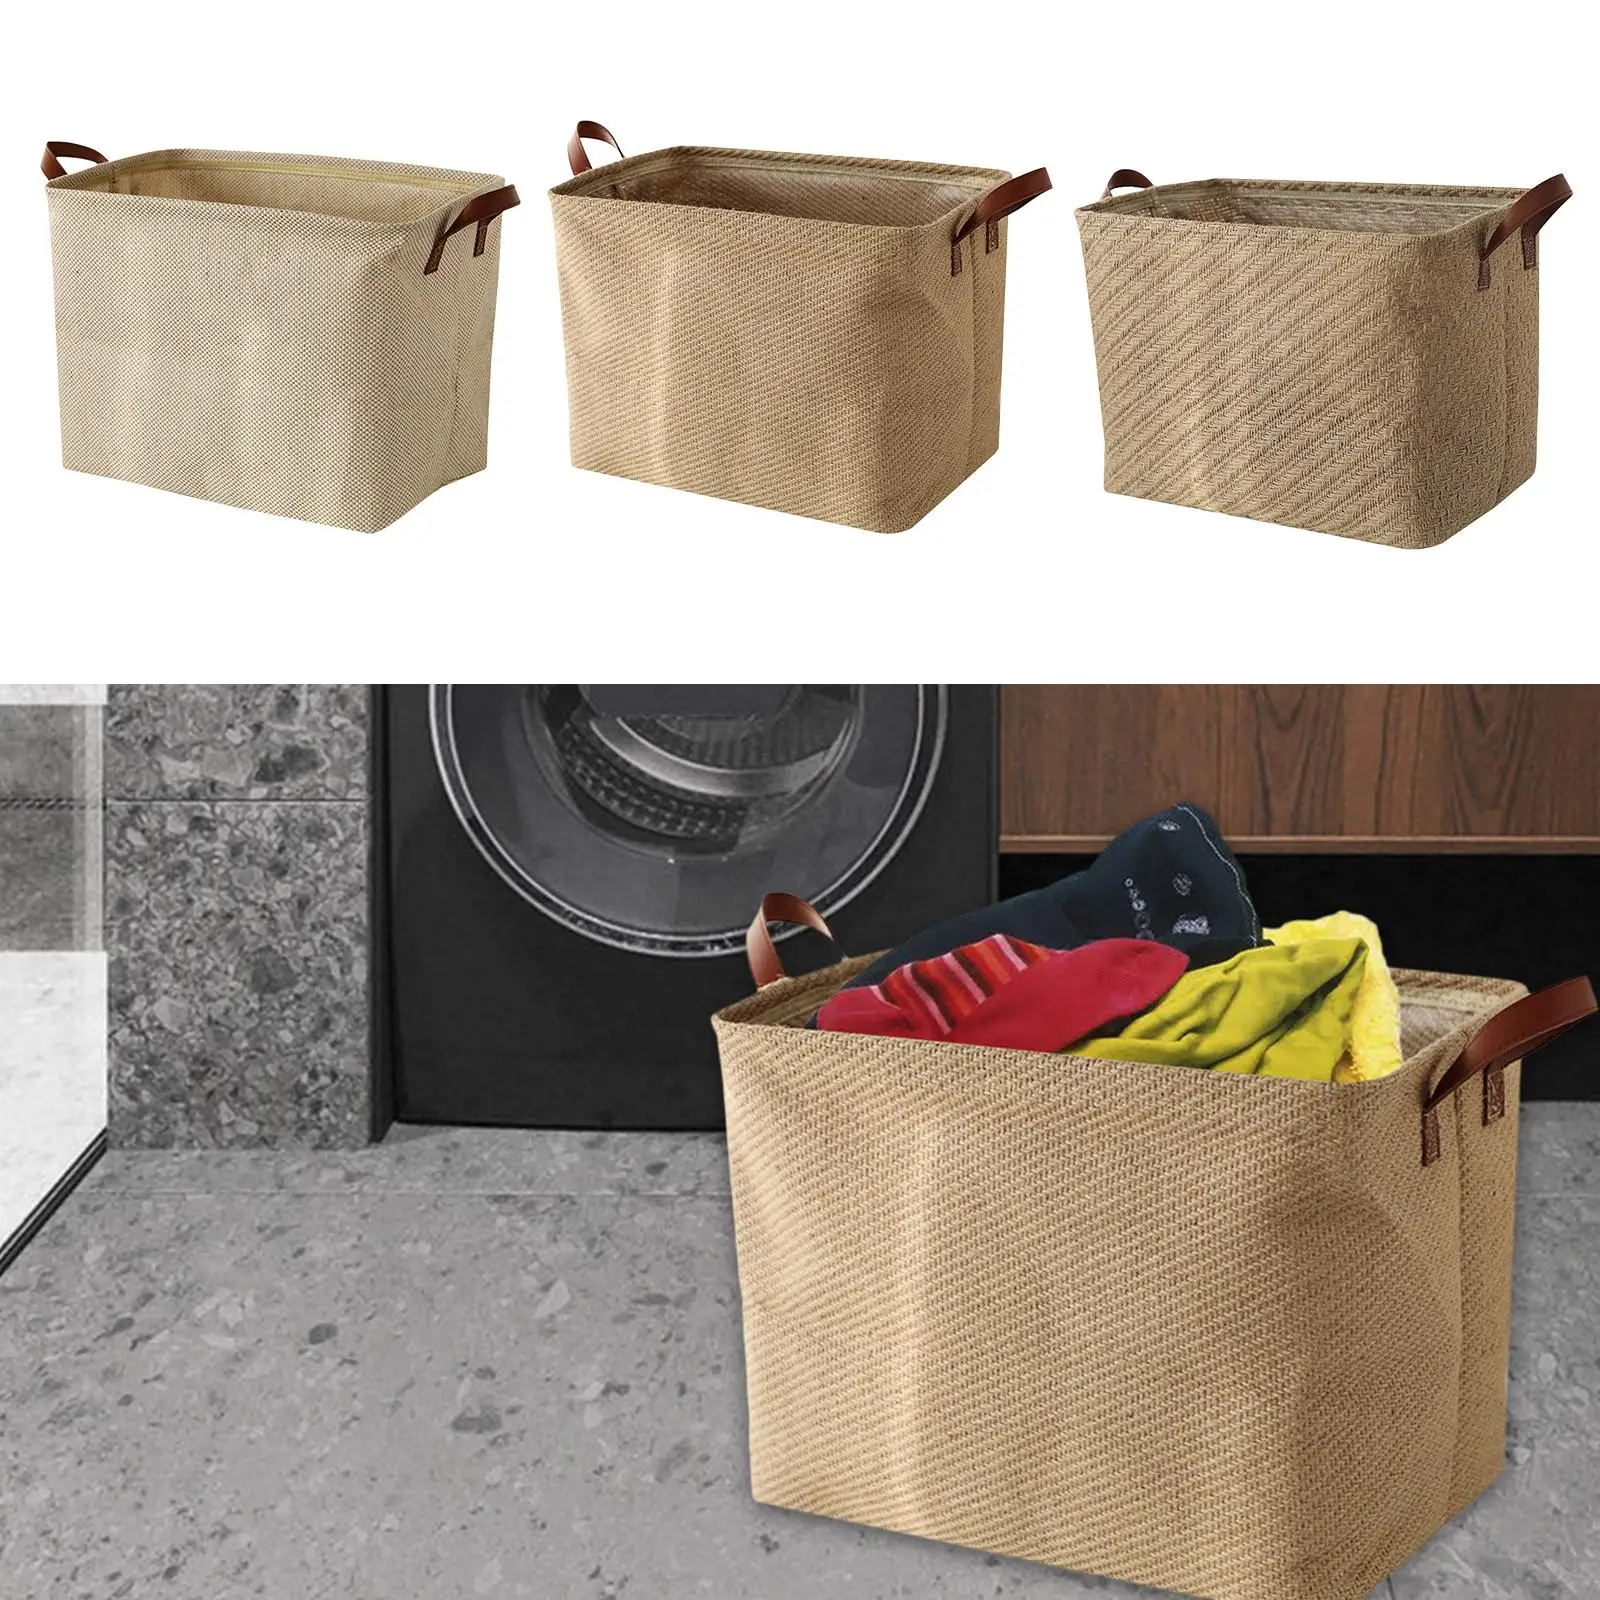 Decorative Laundry Basket With Handles Foldable Storage Basket for The